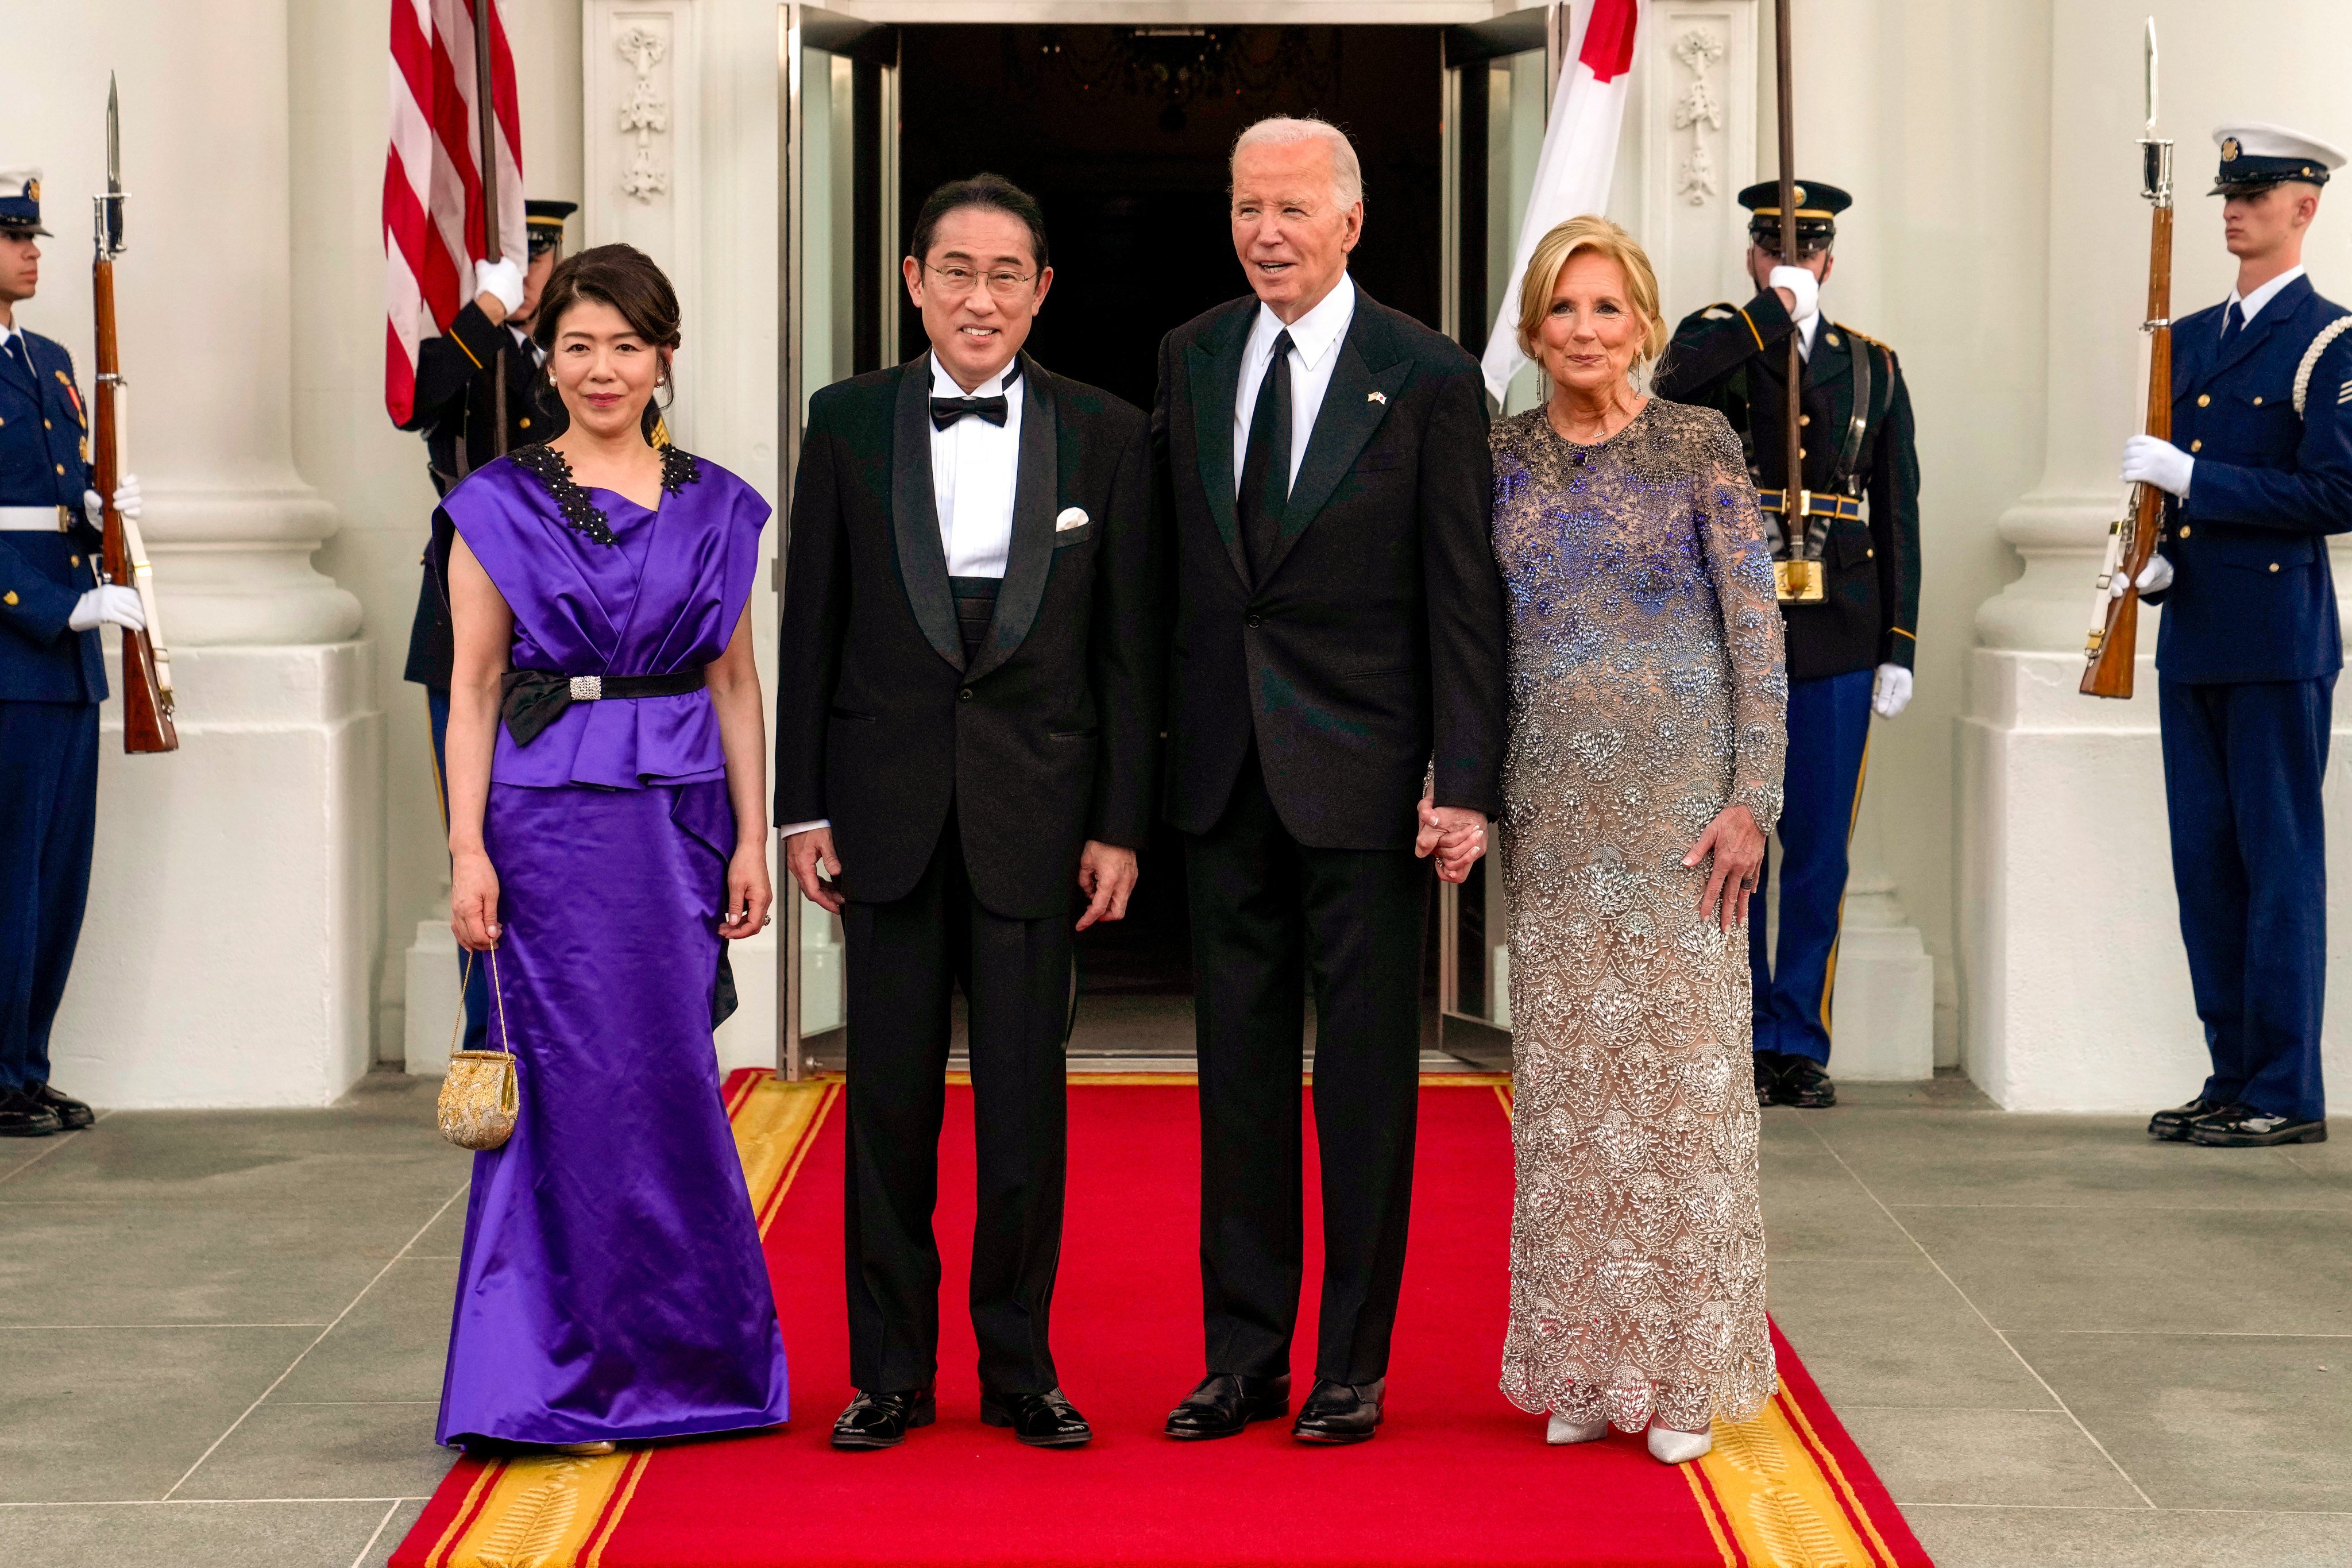 US President Joe Biden and first lady Jill Biden welcome Japanese Prime Minister Fumio Kishida and his wife Yuko Kishida for a state dinner at the White House on Wednesday. Photo: AP